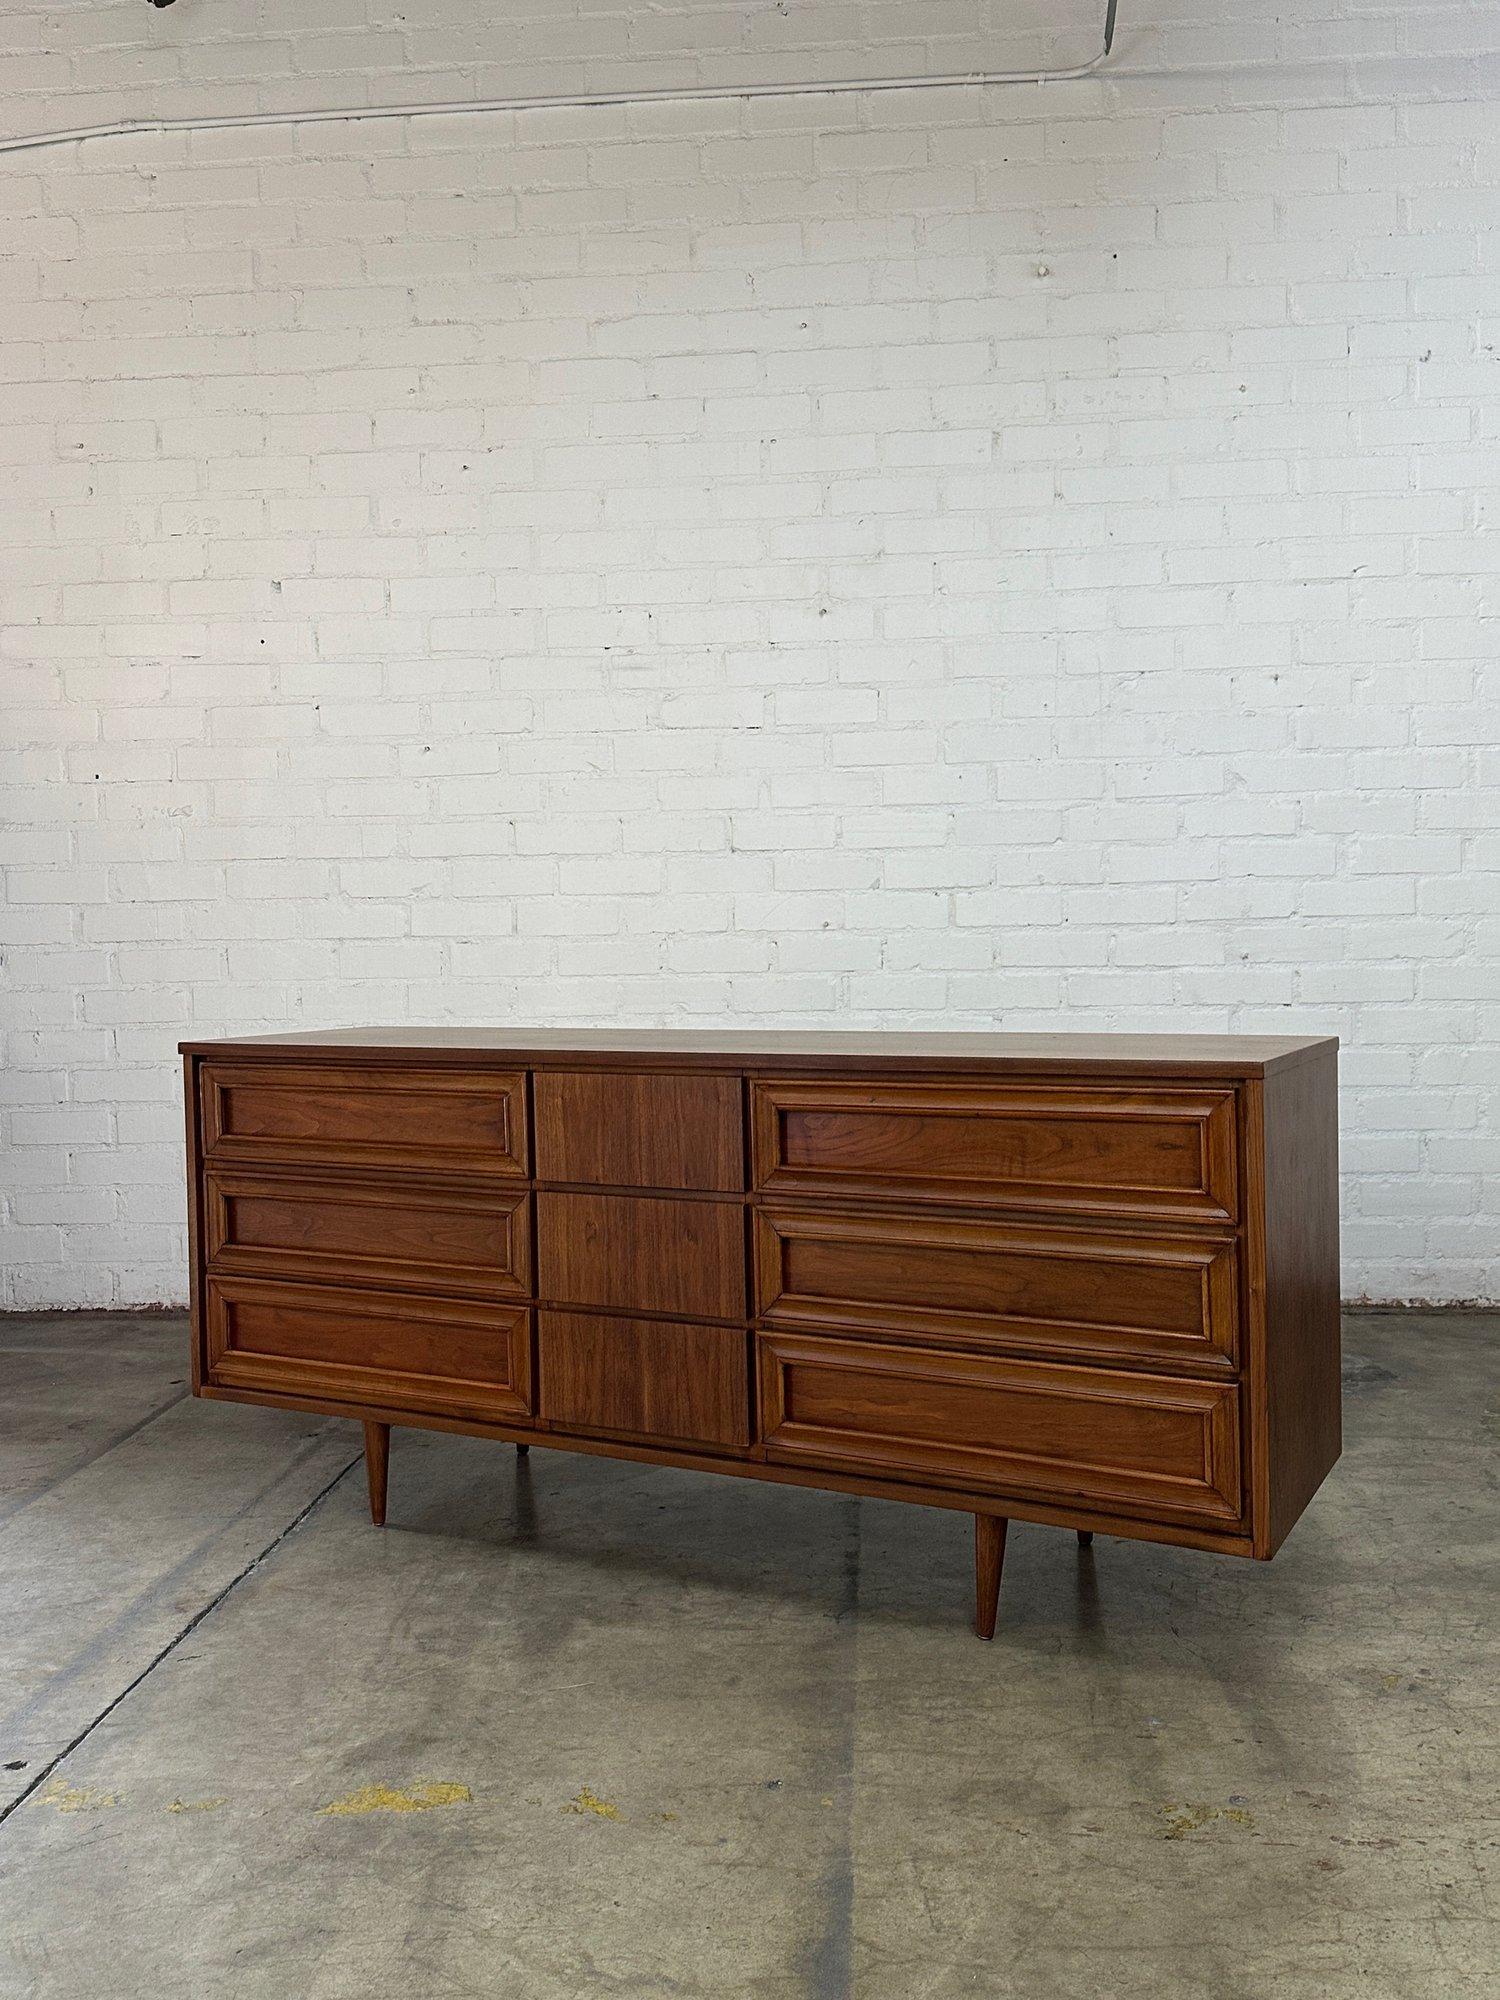 W70 D19 H30

Fully restored lowboy dresser circa 1960s. Item shows well with no visible areas of wear, item is structurally sound and fully functional . Item features hidden pulls on the center drawers and outer drawers have encased drawers that